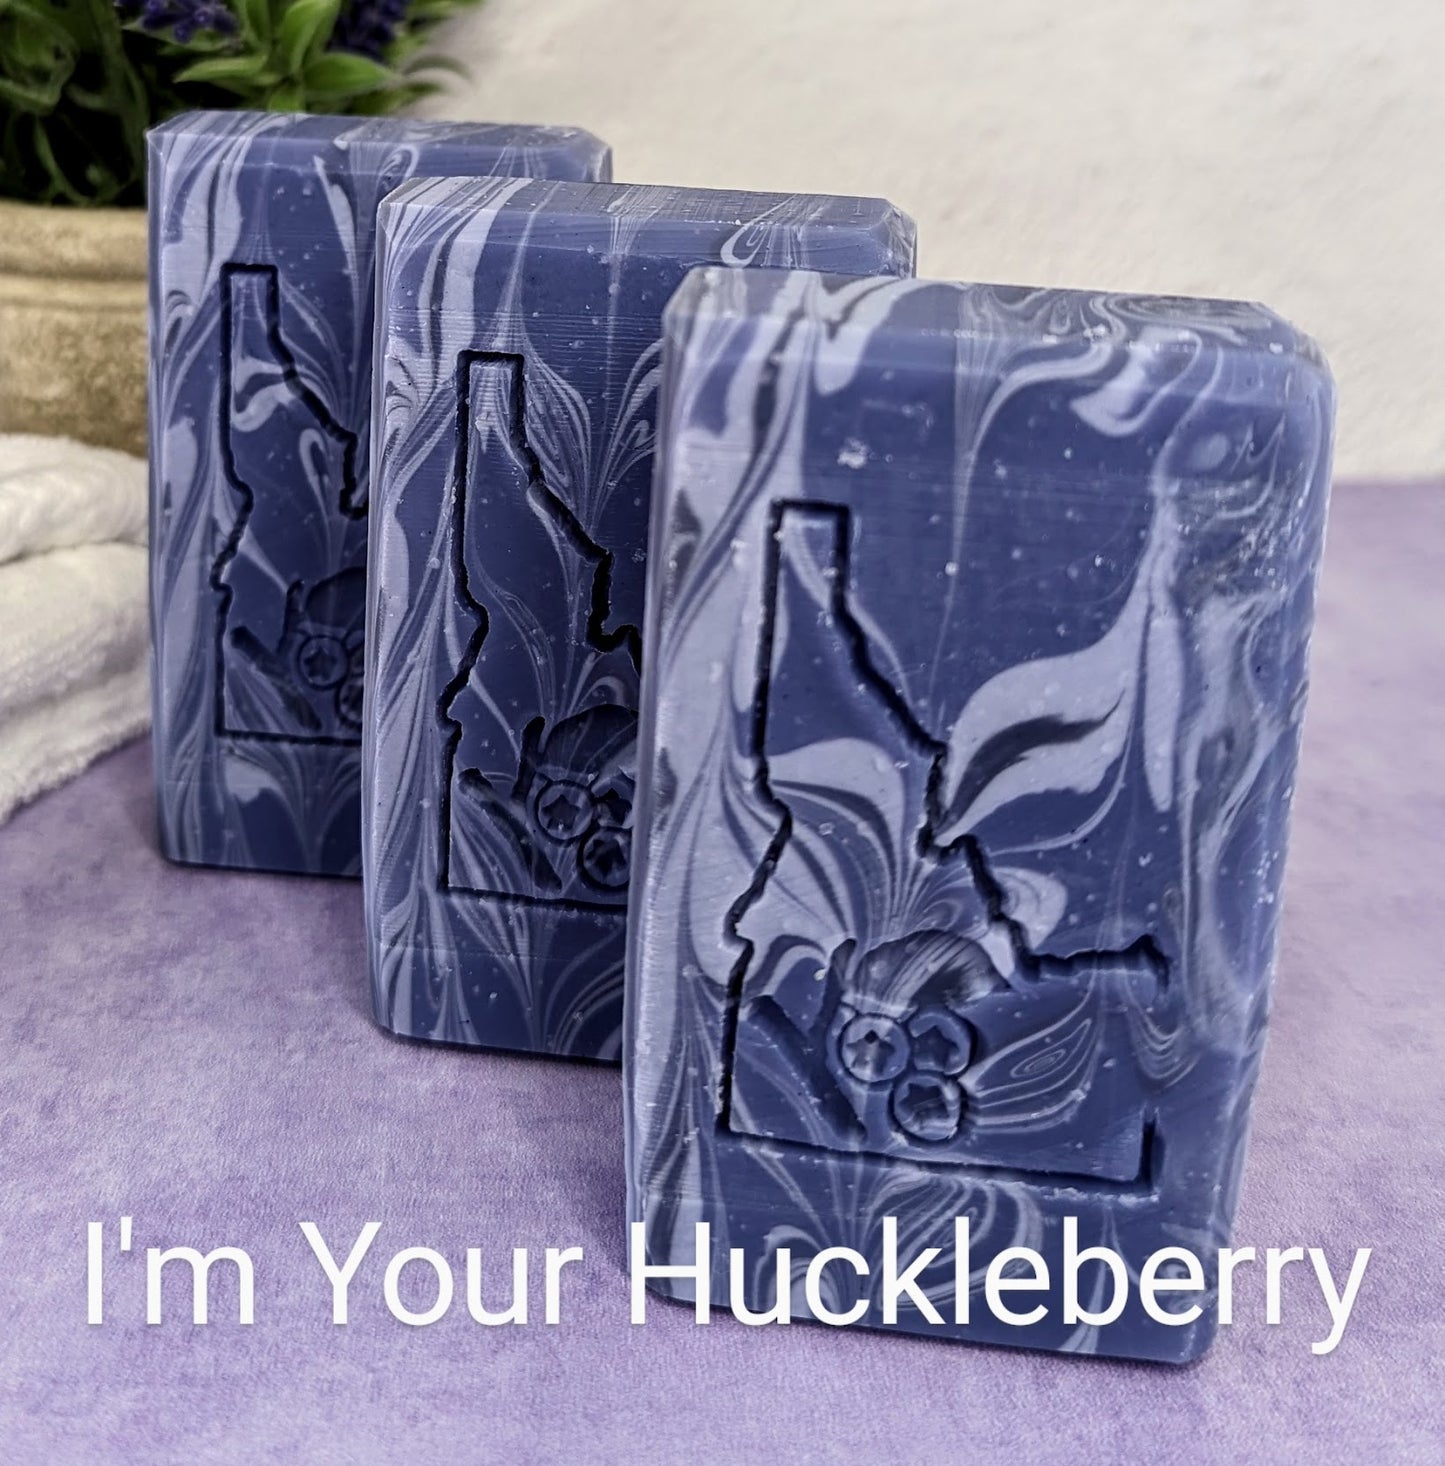 "I'm Your Huckleberry" Collection